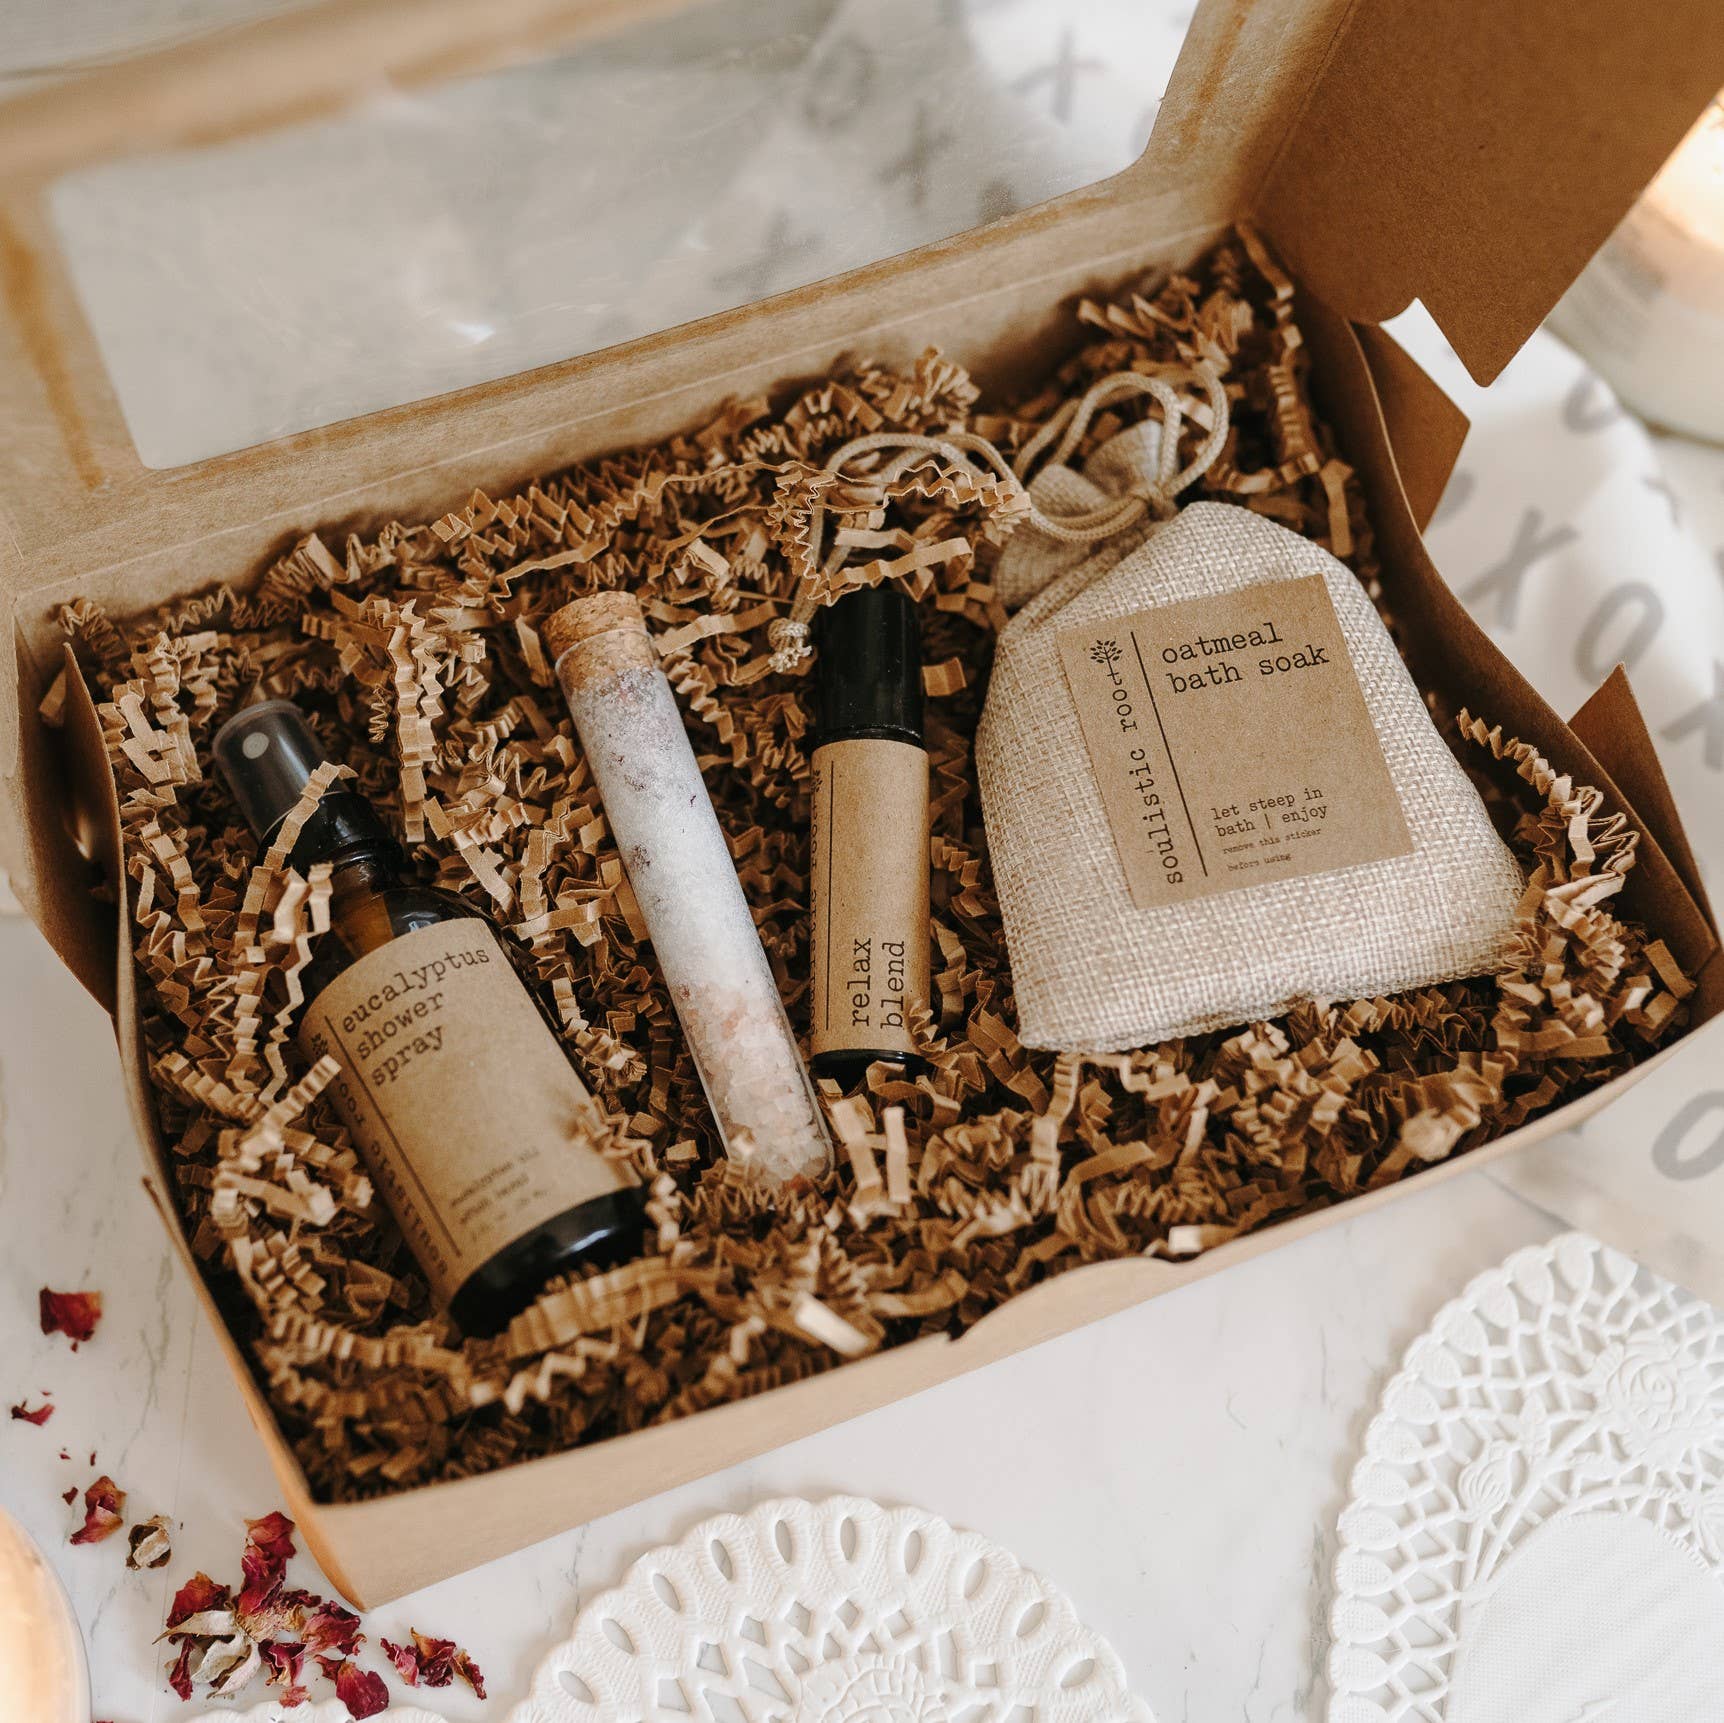 Tranquil Bath Gift Set - The Self-Care Seed Co.